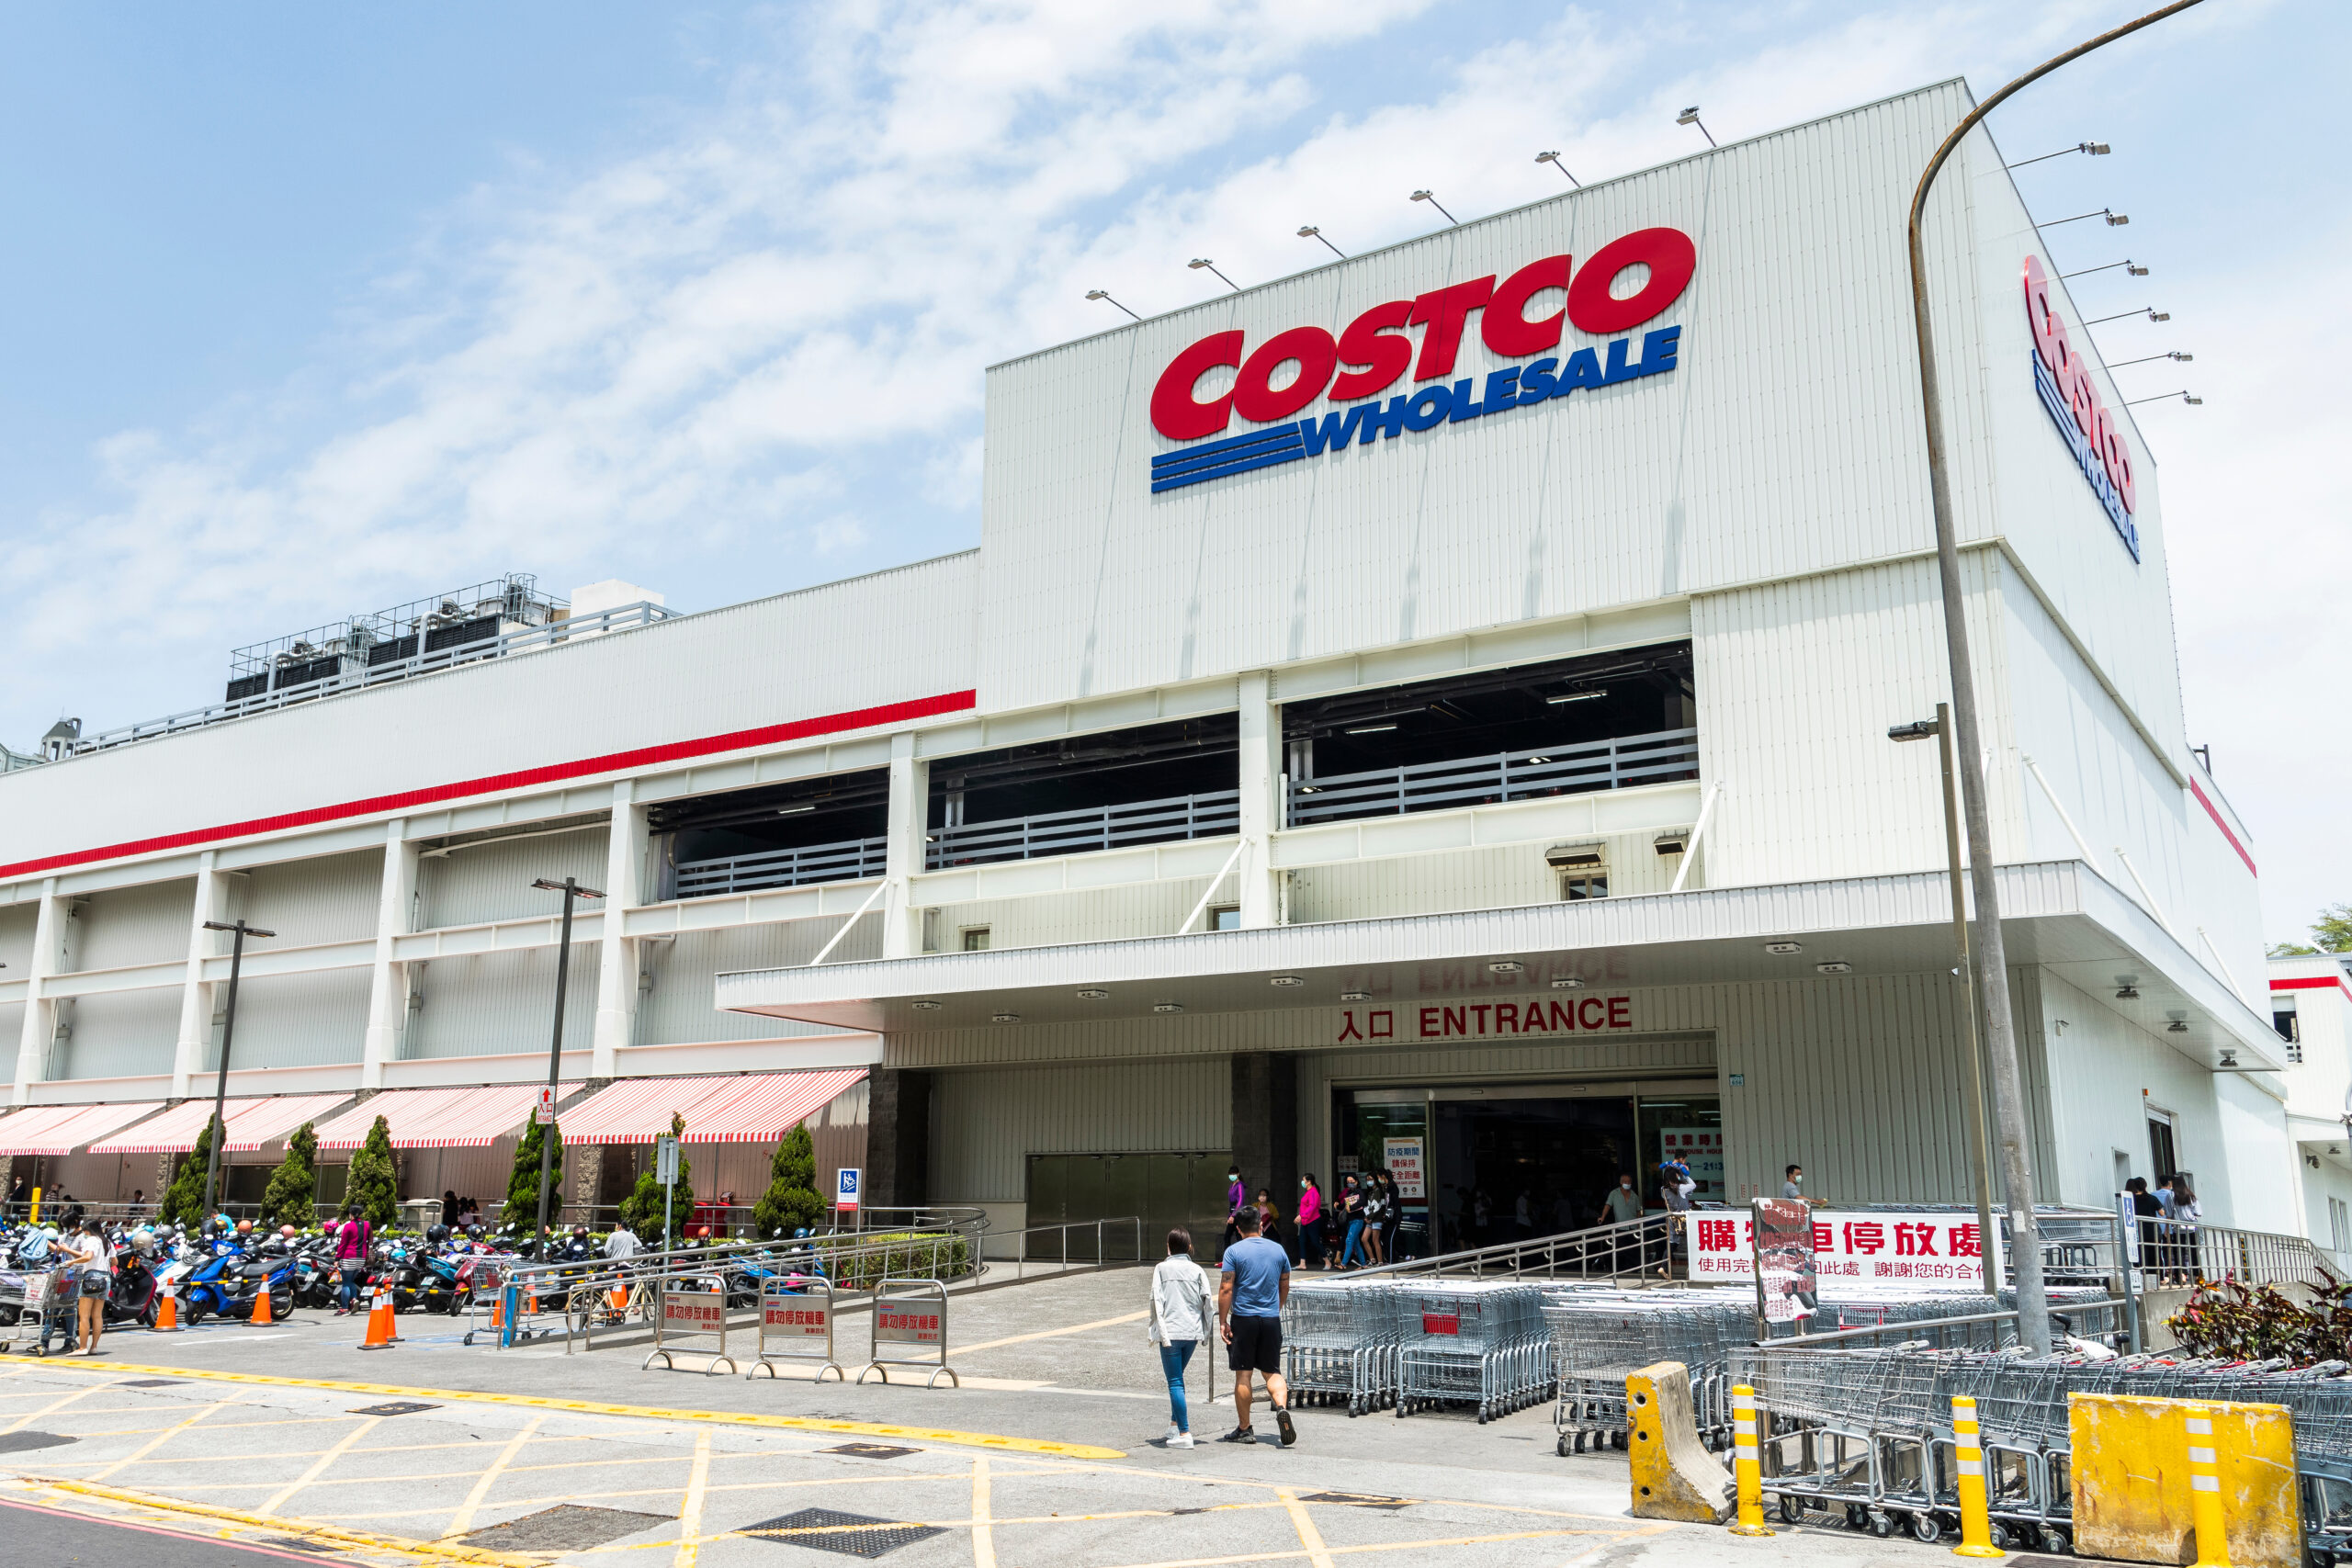 Kaohsiung, Taiwan- April 18, 2021: view of Costco wholesale storefront in Kaohsiung, Taiwan. Costco Wholesale Company is the largest membership warehousing club in the United States.
